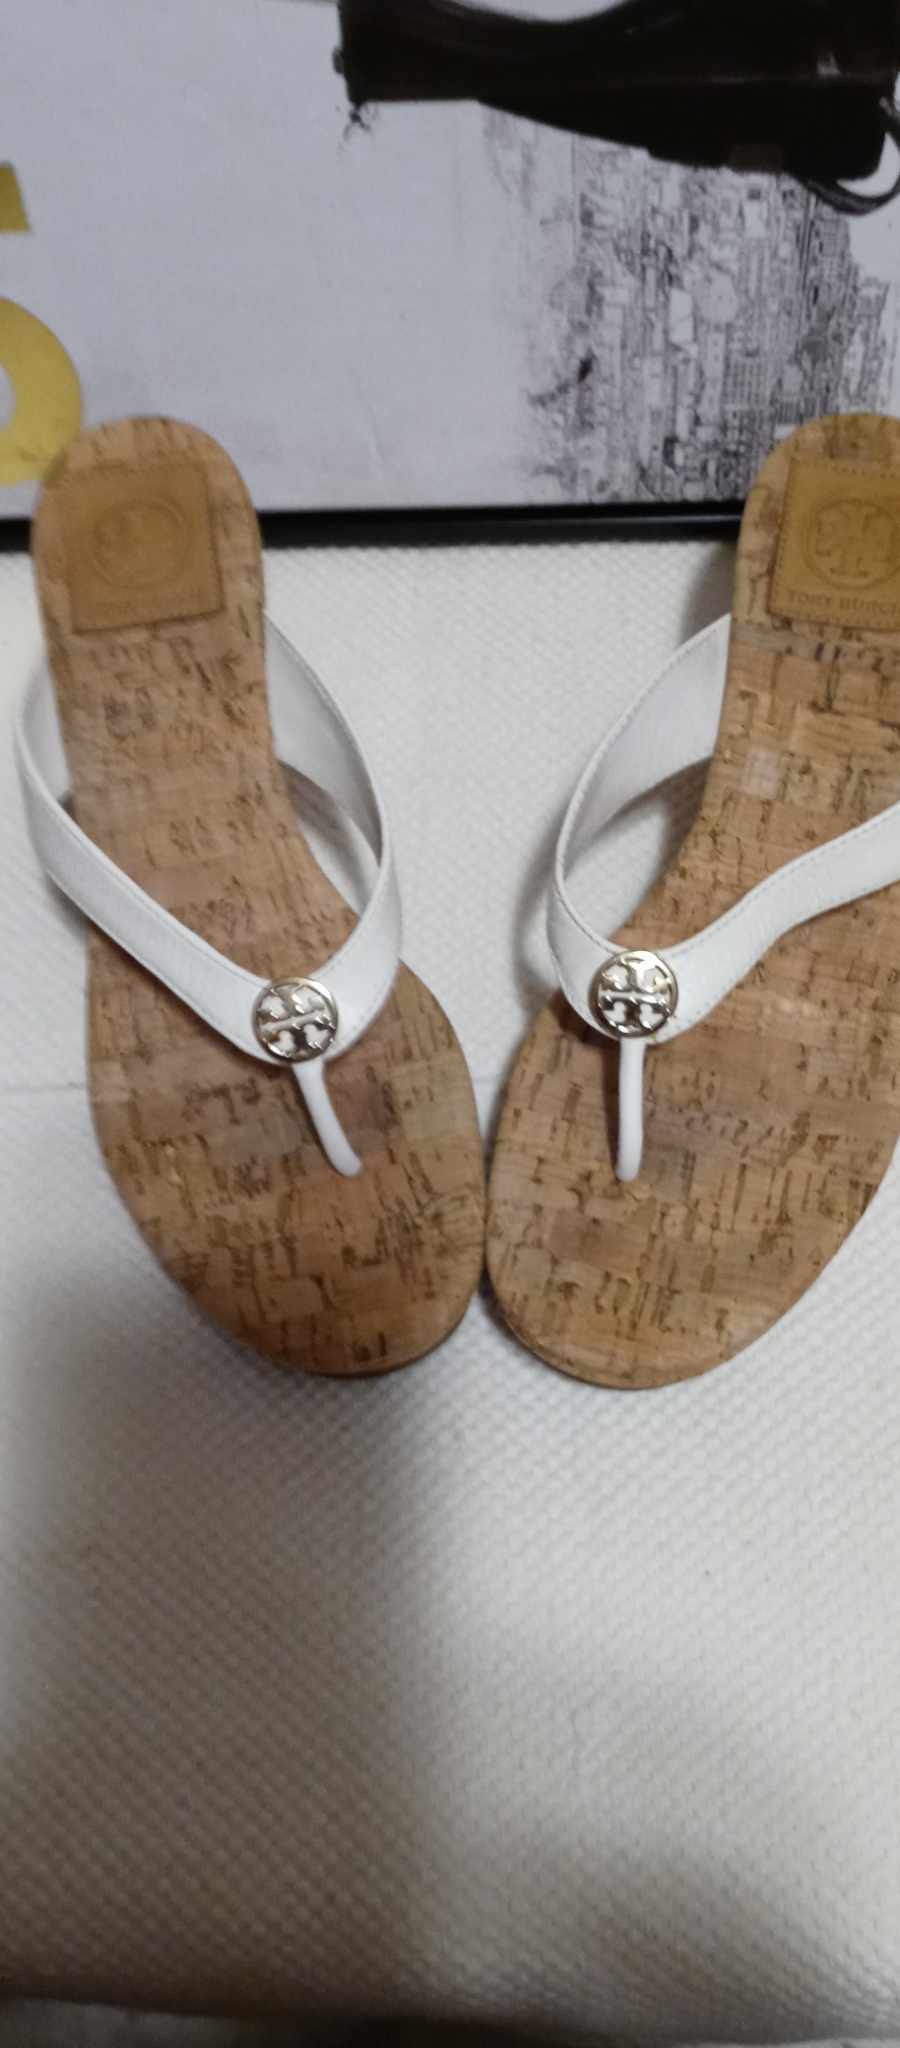 PENDING Tory Burch wedges Size 7.5m